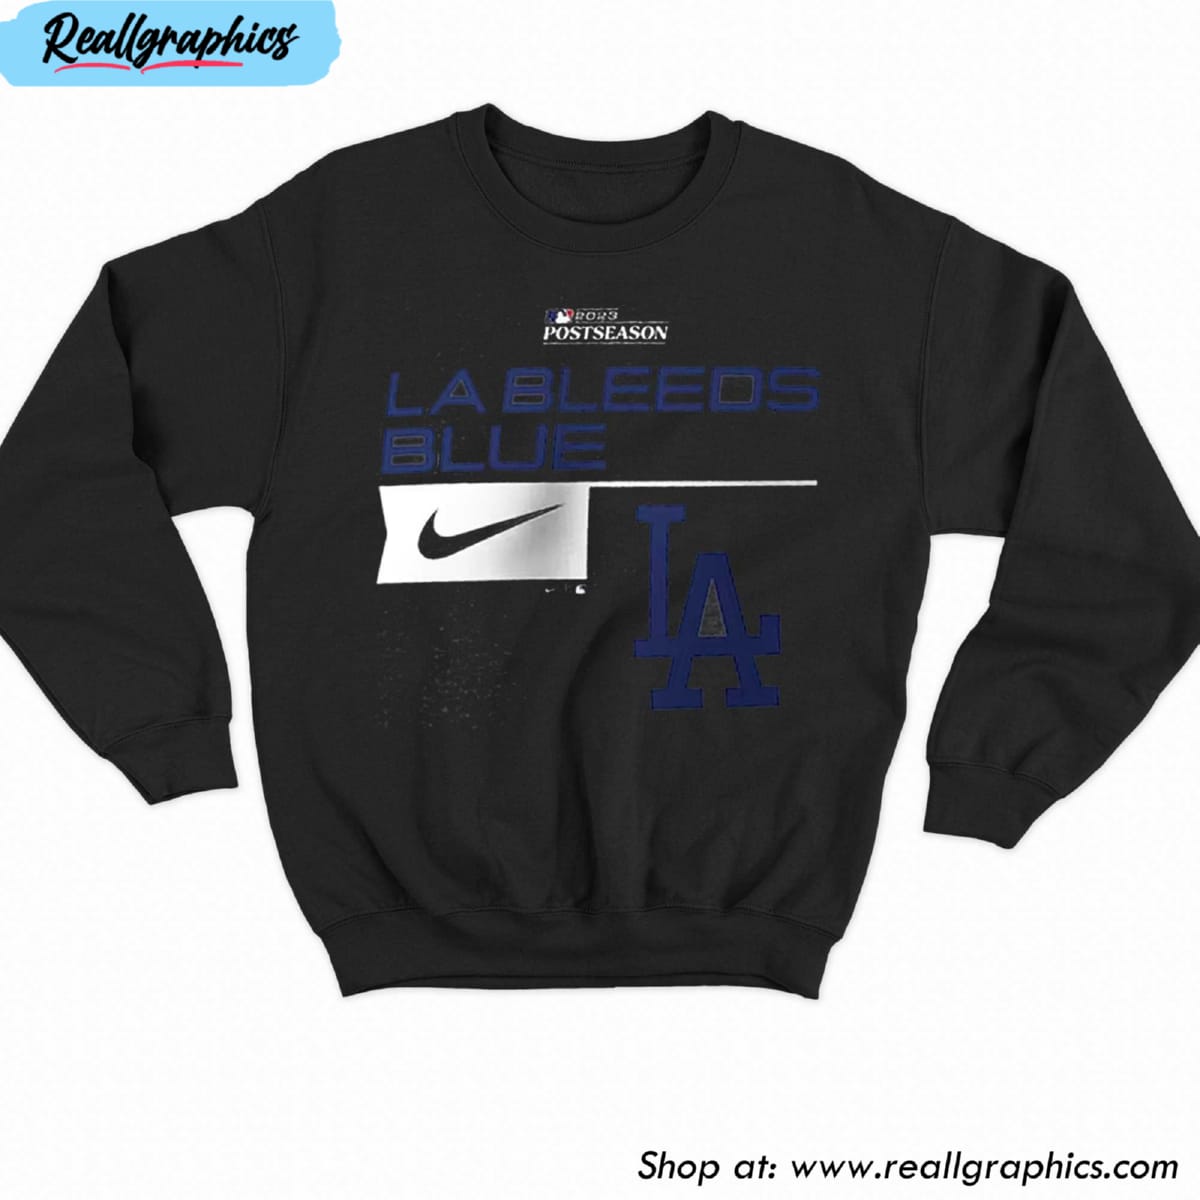 Los angeles dodgers and los angeles lakers shirt, hoodie, sweater